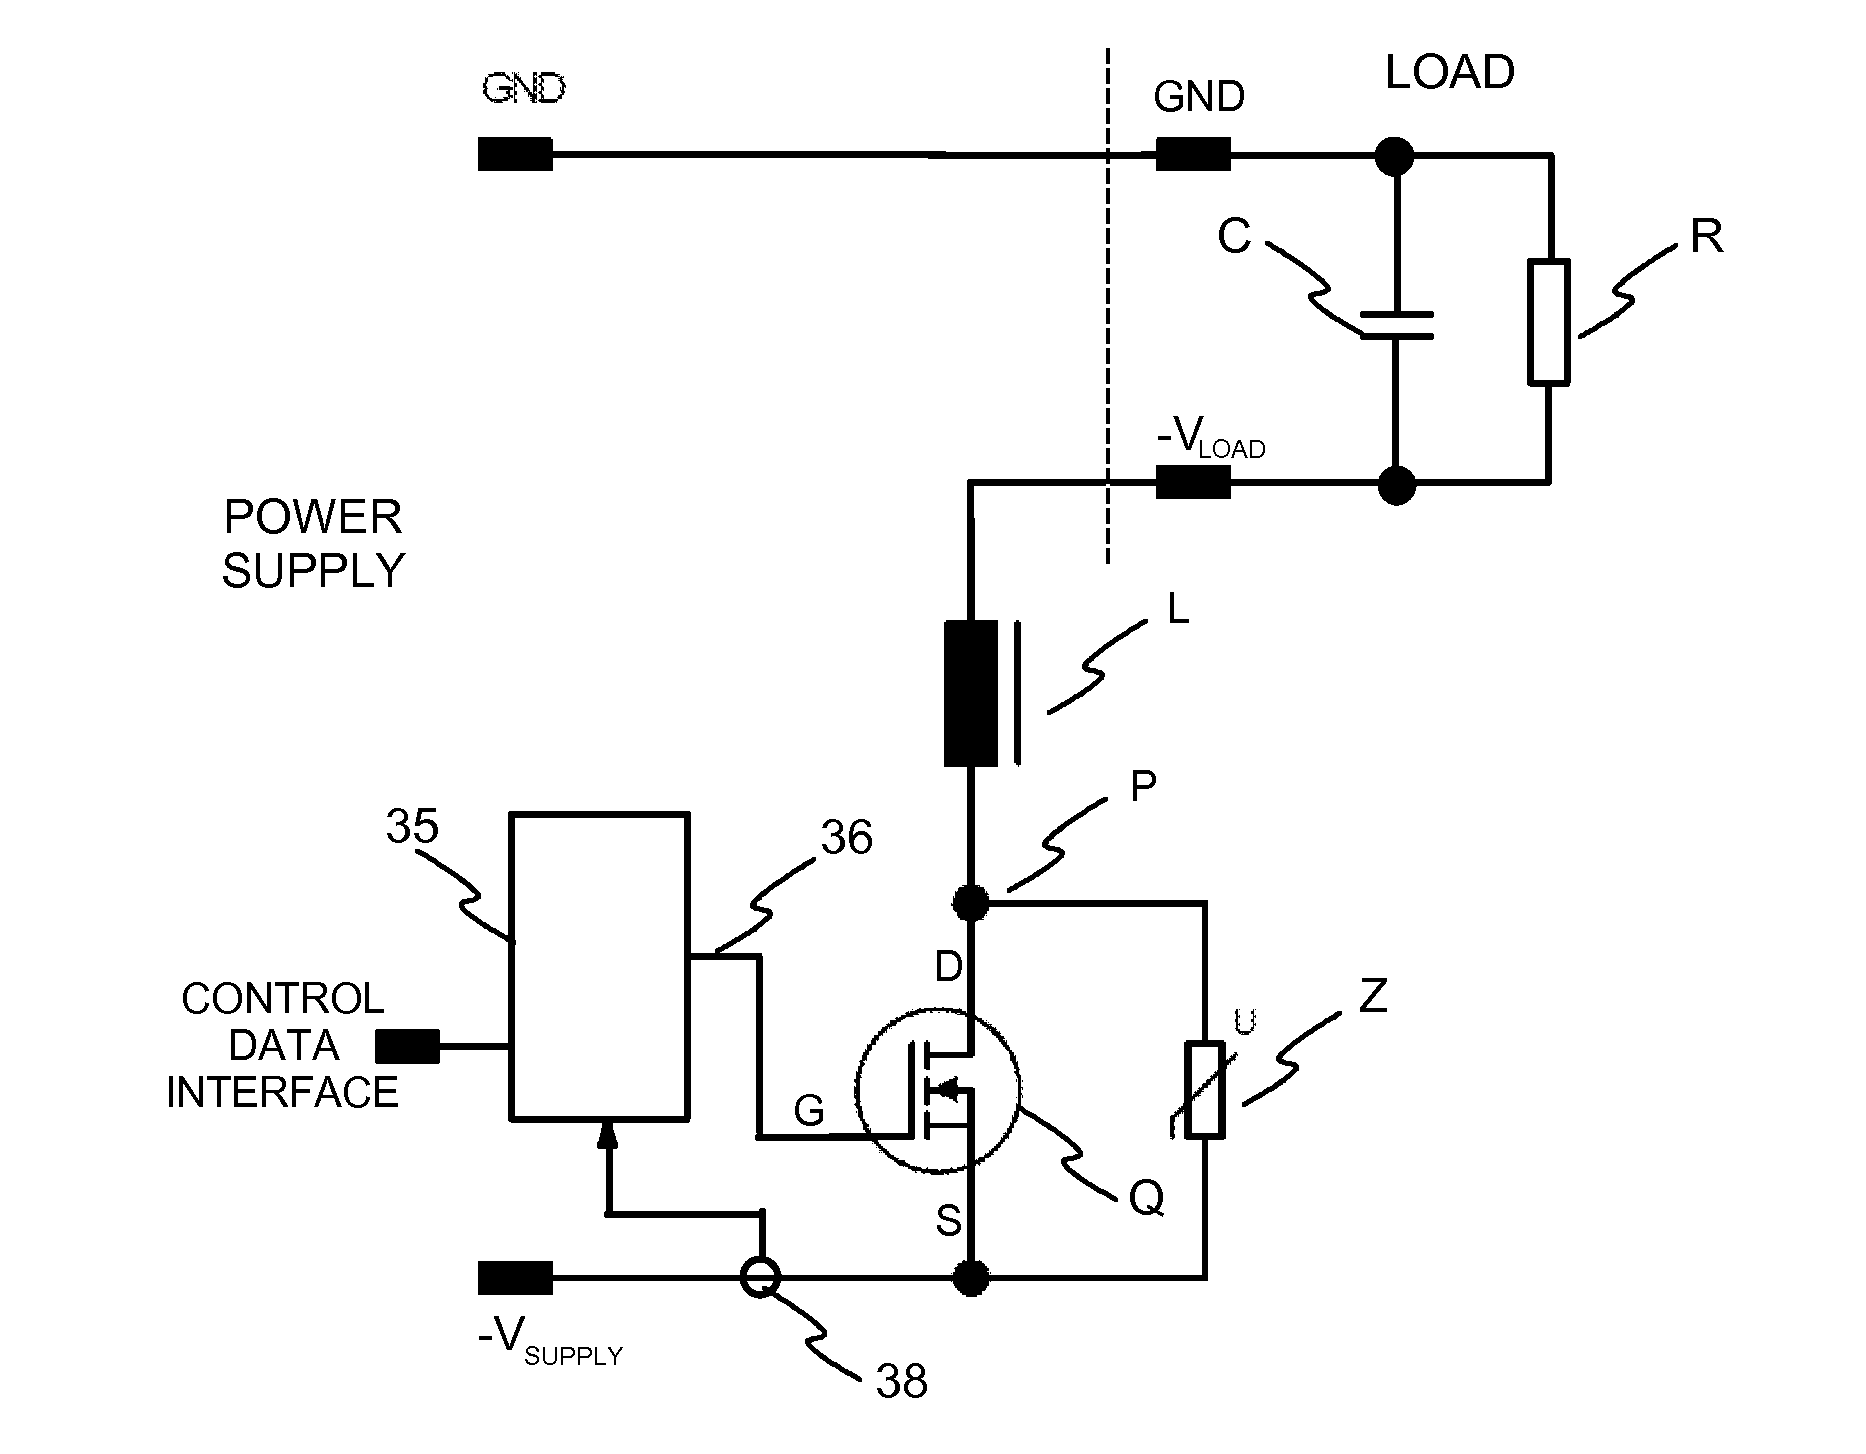 Circuit, method and system for overload protection